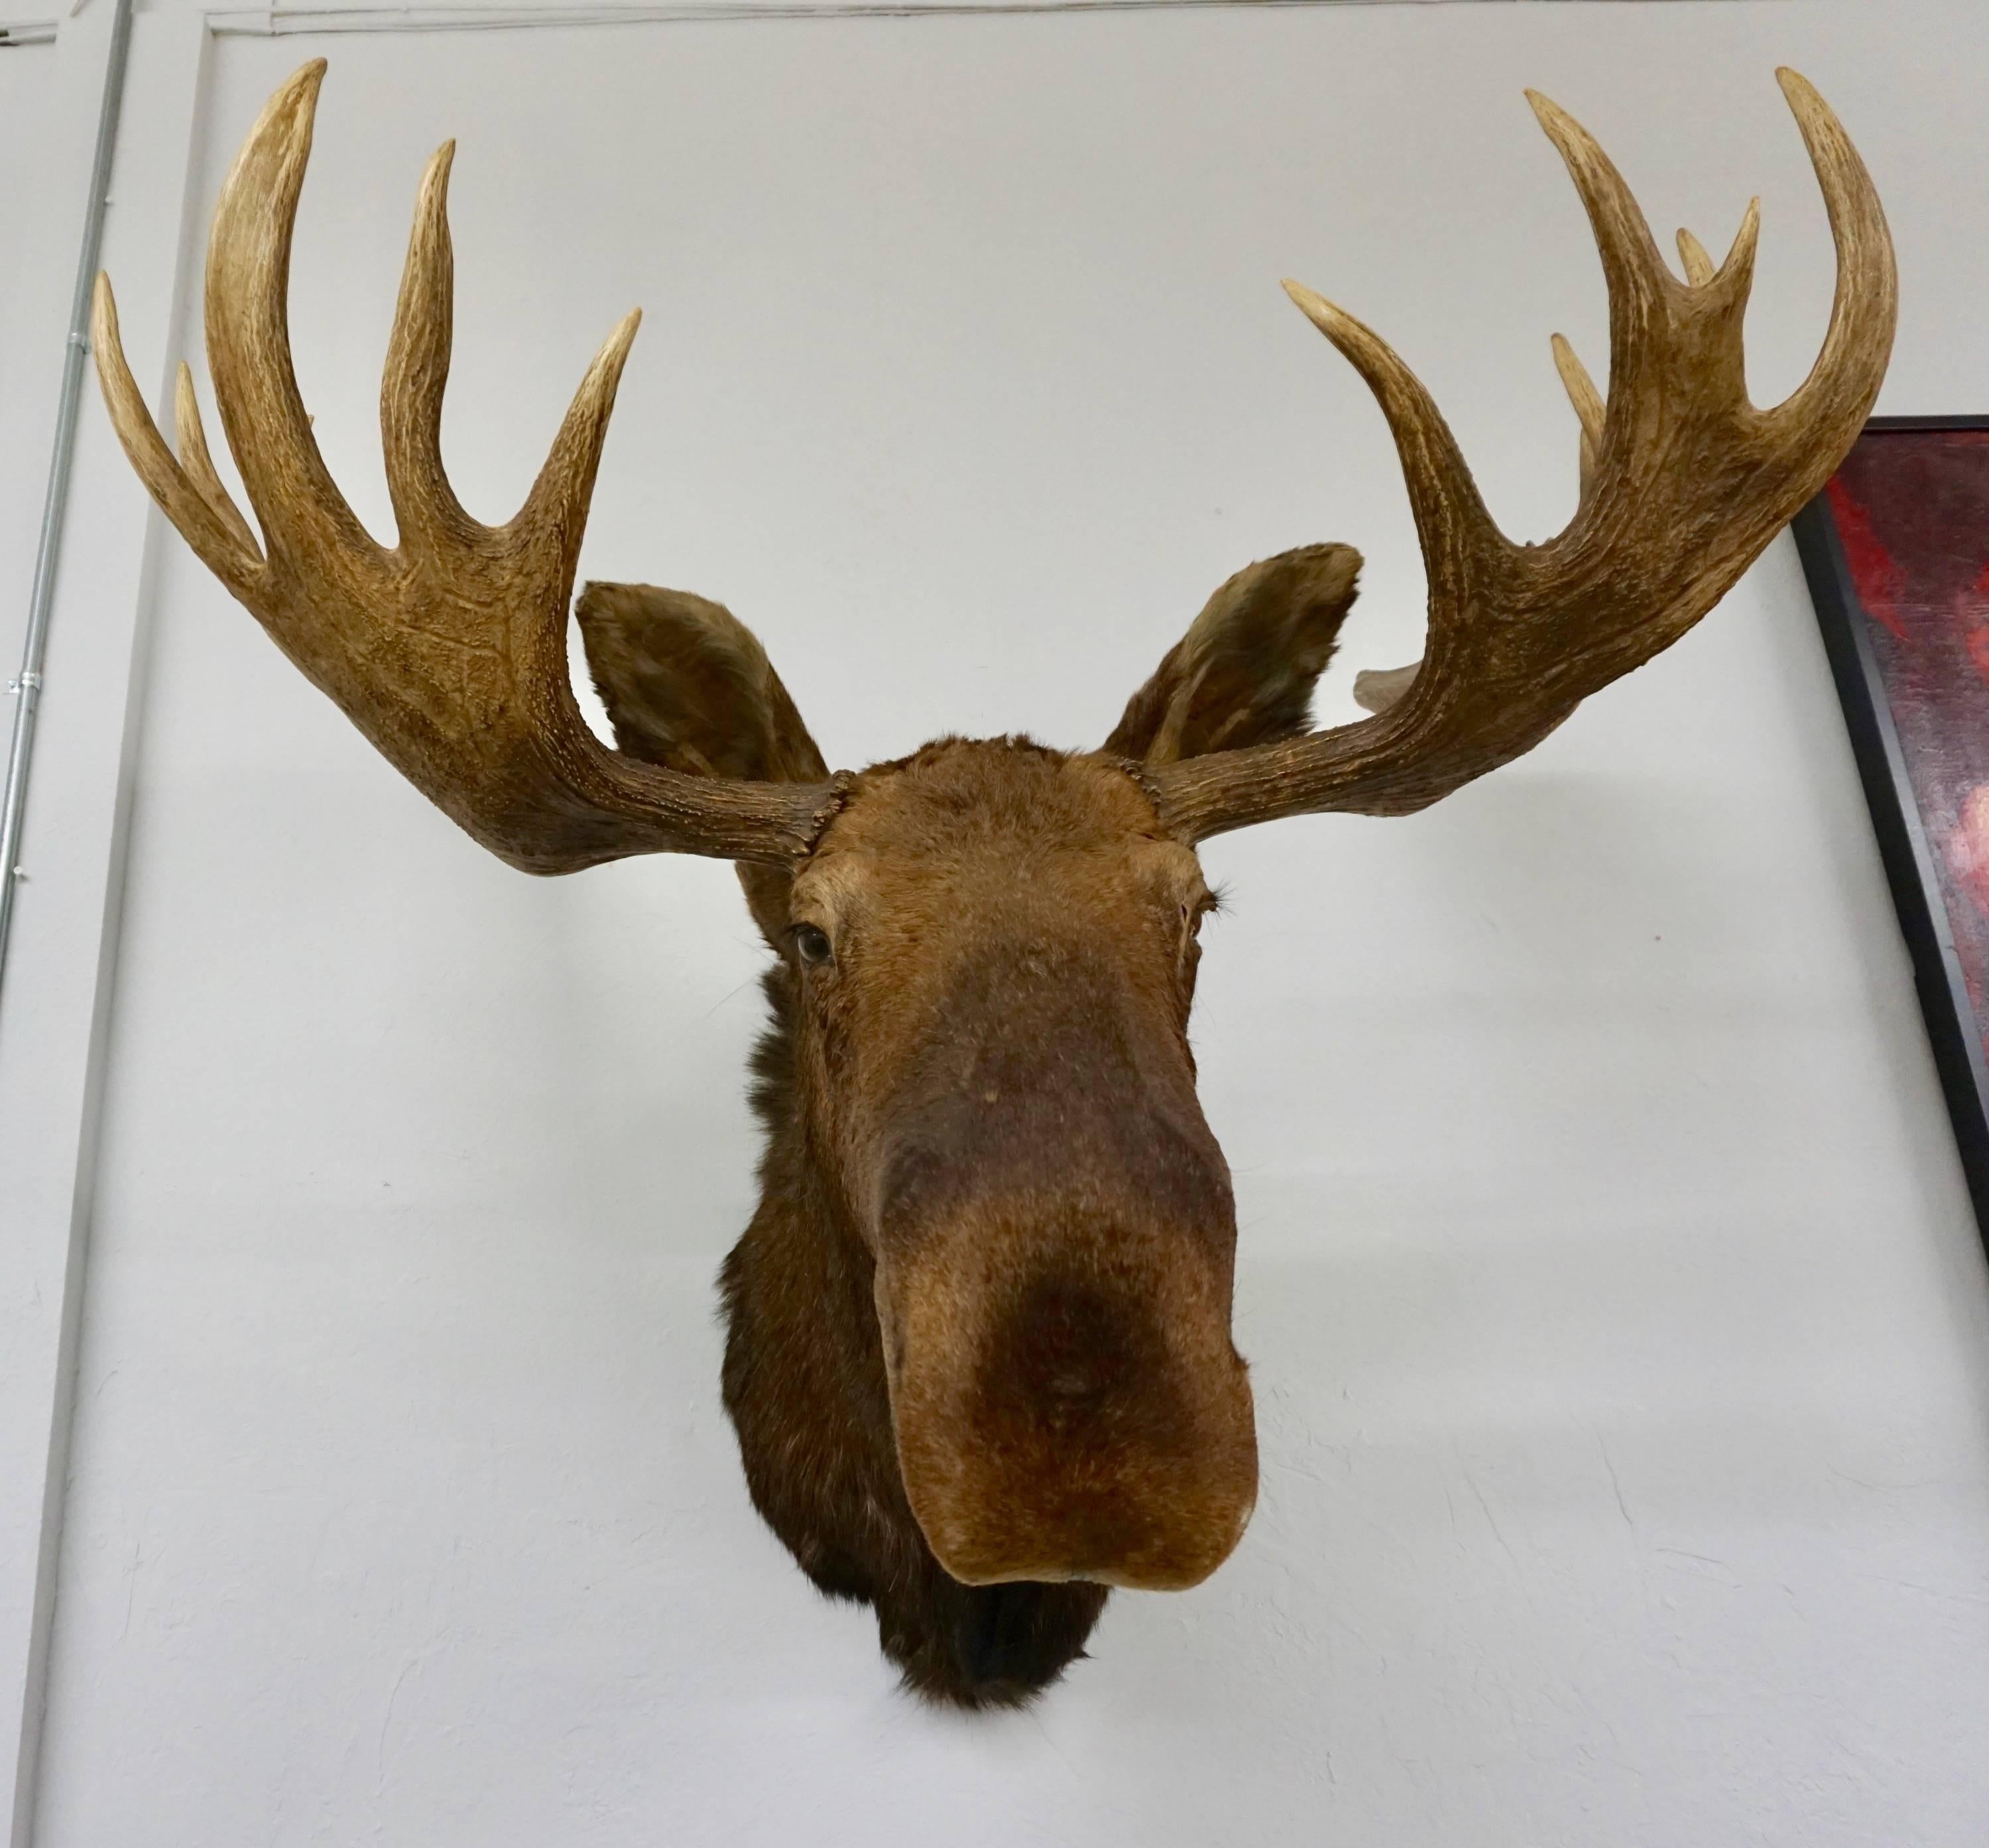 This is a fantastic Alaskan Moose taxidermy shoulder mount, posed with the head in a up position and looking straight out into the room. Great set of antlers, the hide itself is in really nice condition as well, and features thick hair. Expert